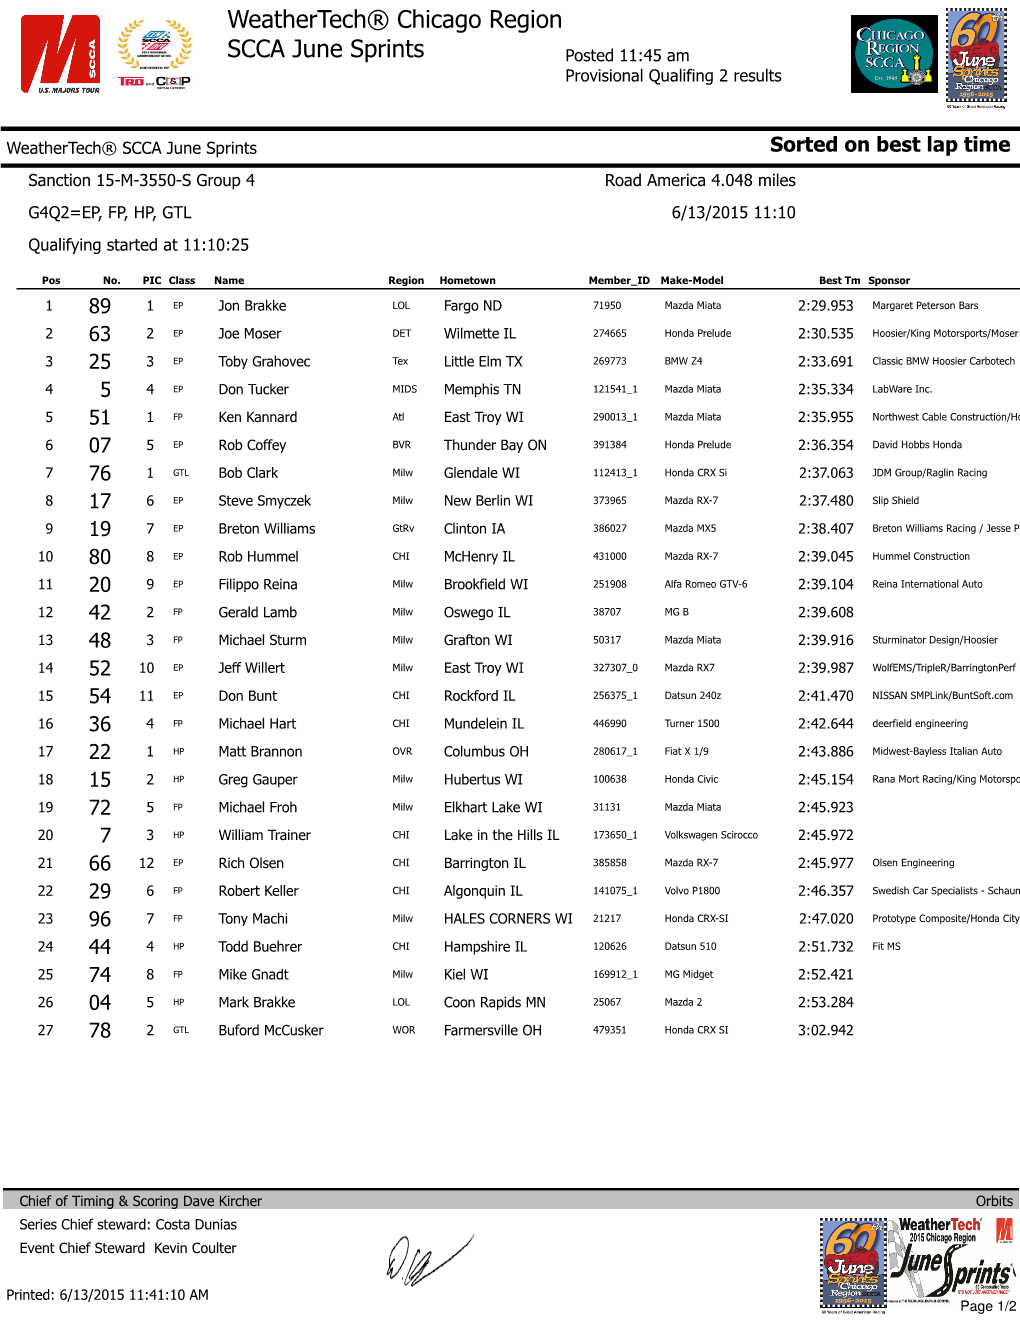 Weathertech® Chicago Region SCCA June Sprints Posted 11:45 Am Provisional Qualifing 2 Results